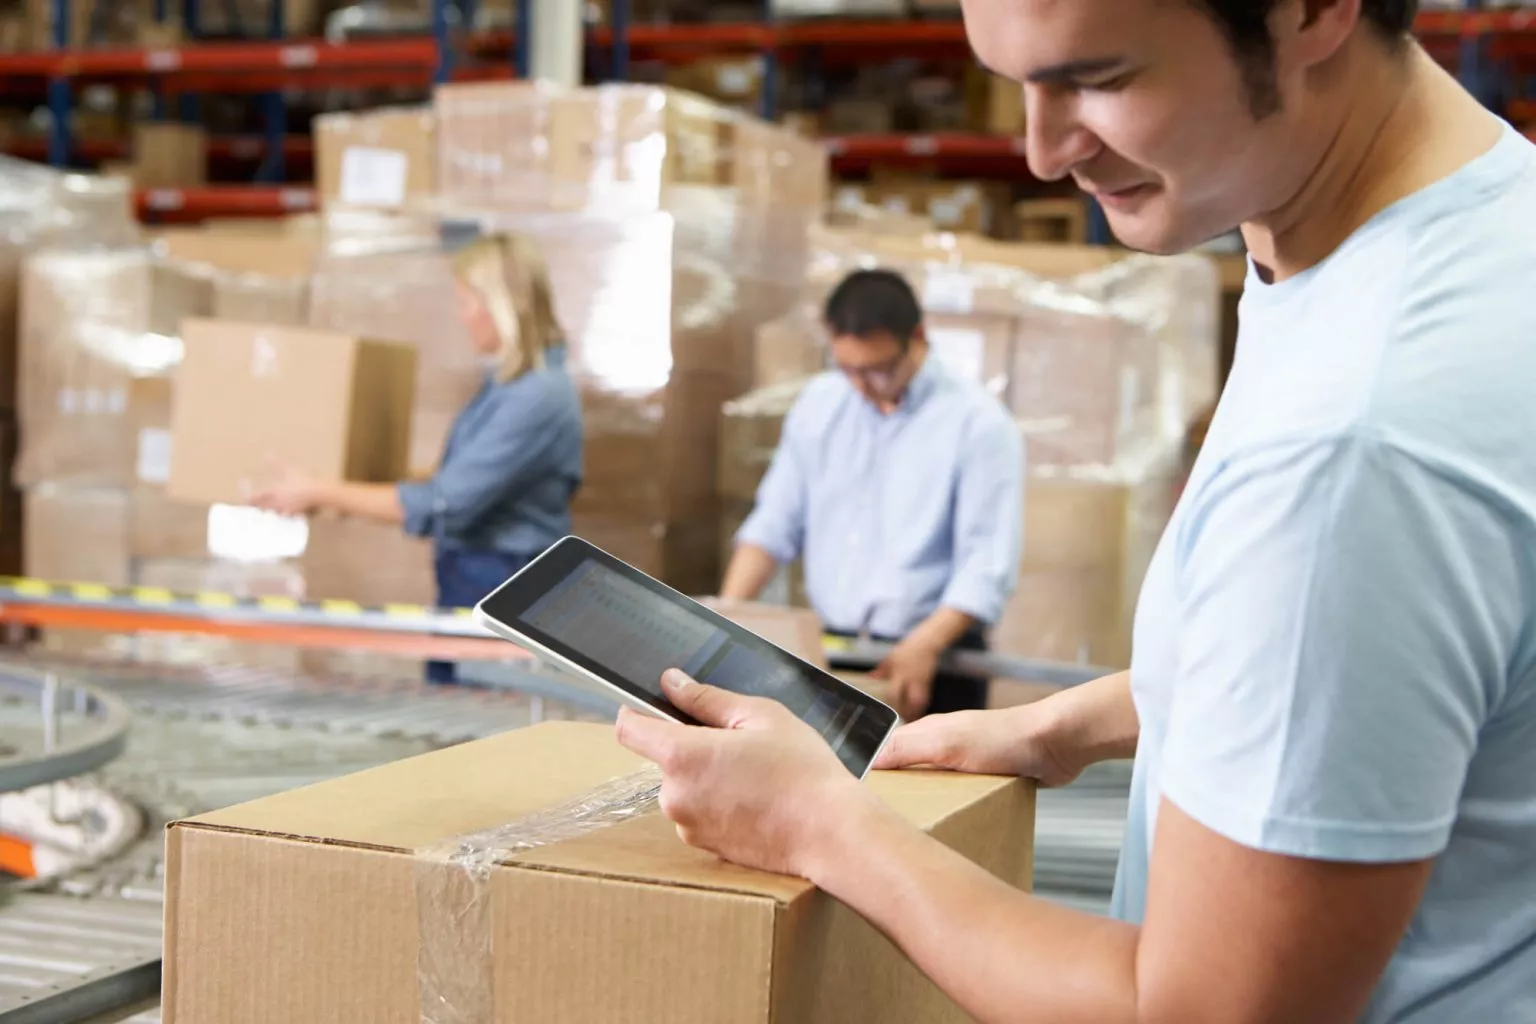 Management and Strategy for Optimal Fulfillment Solutions